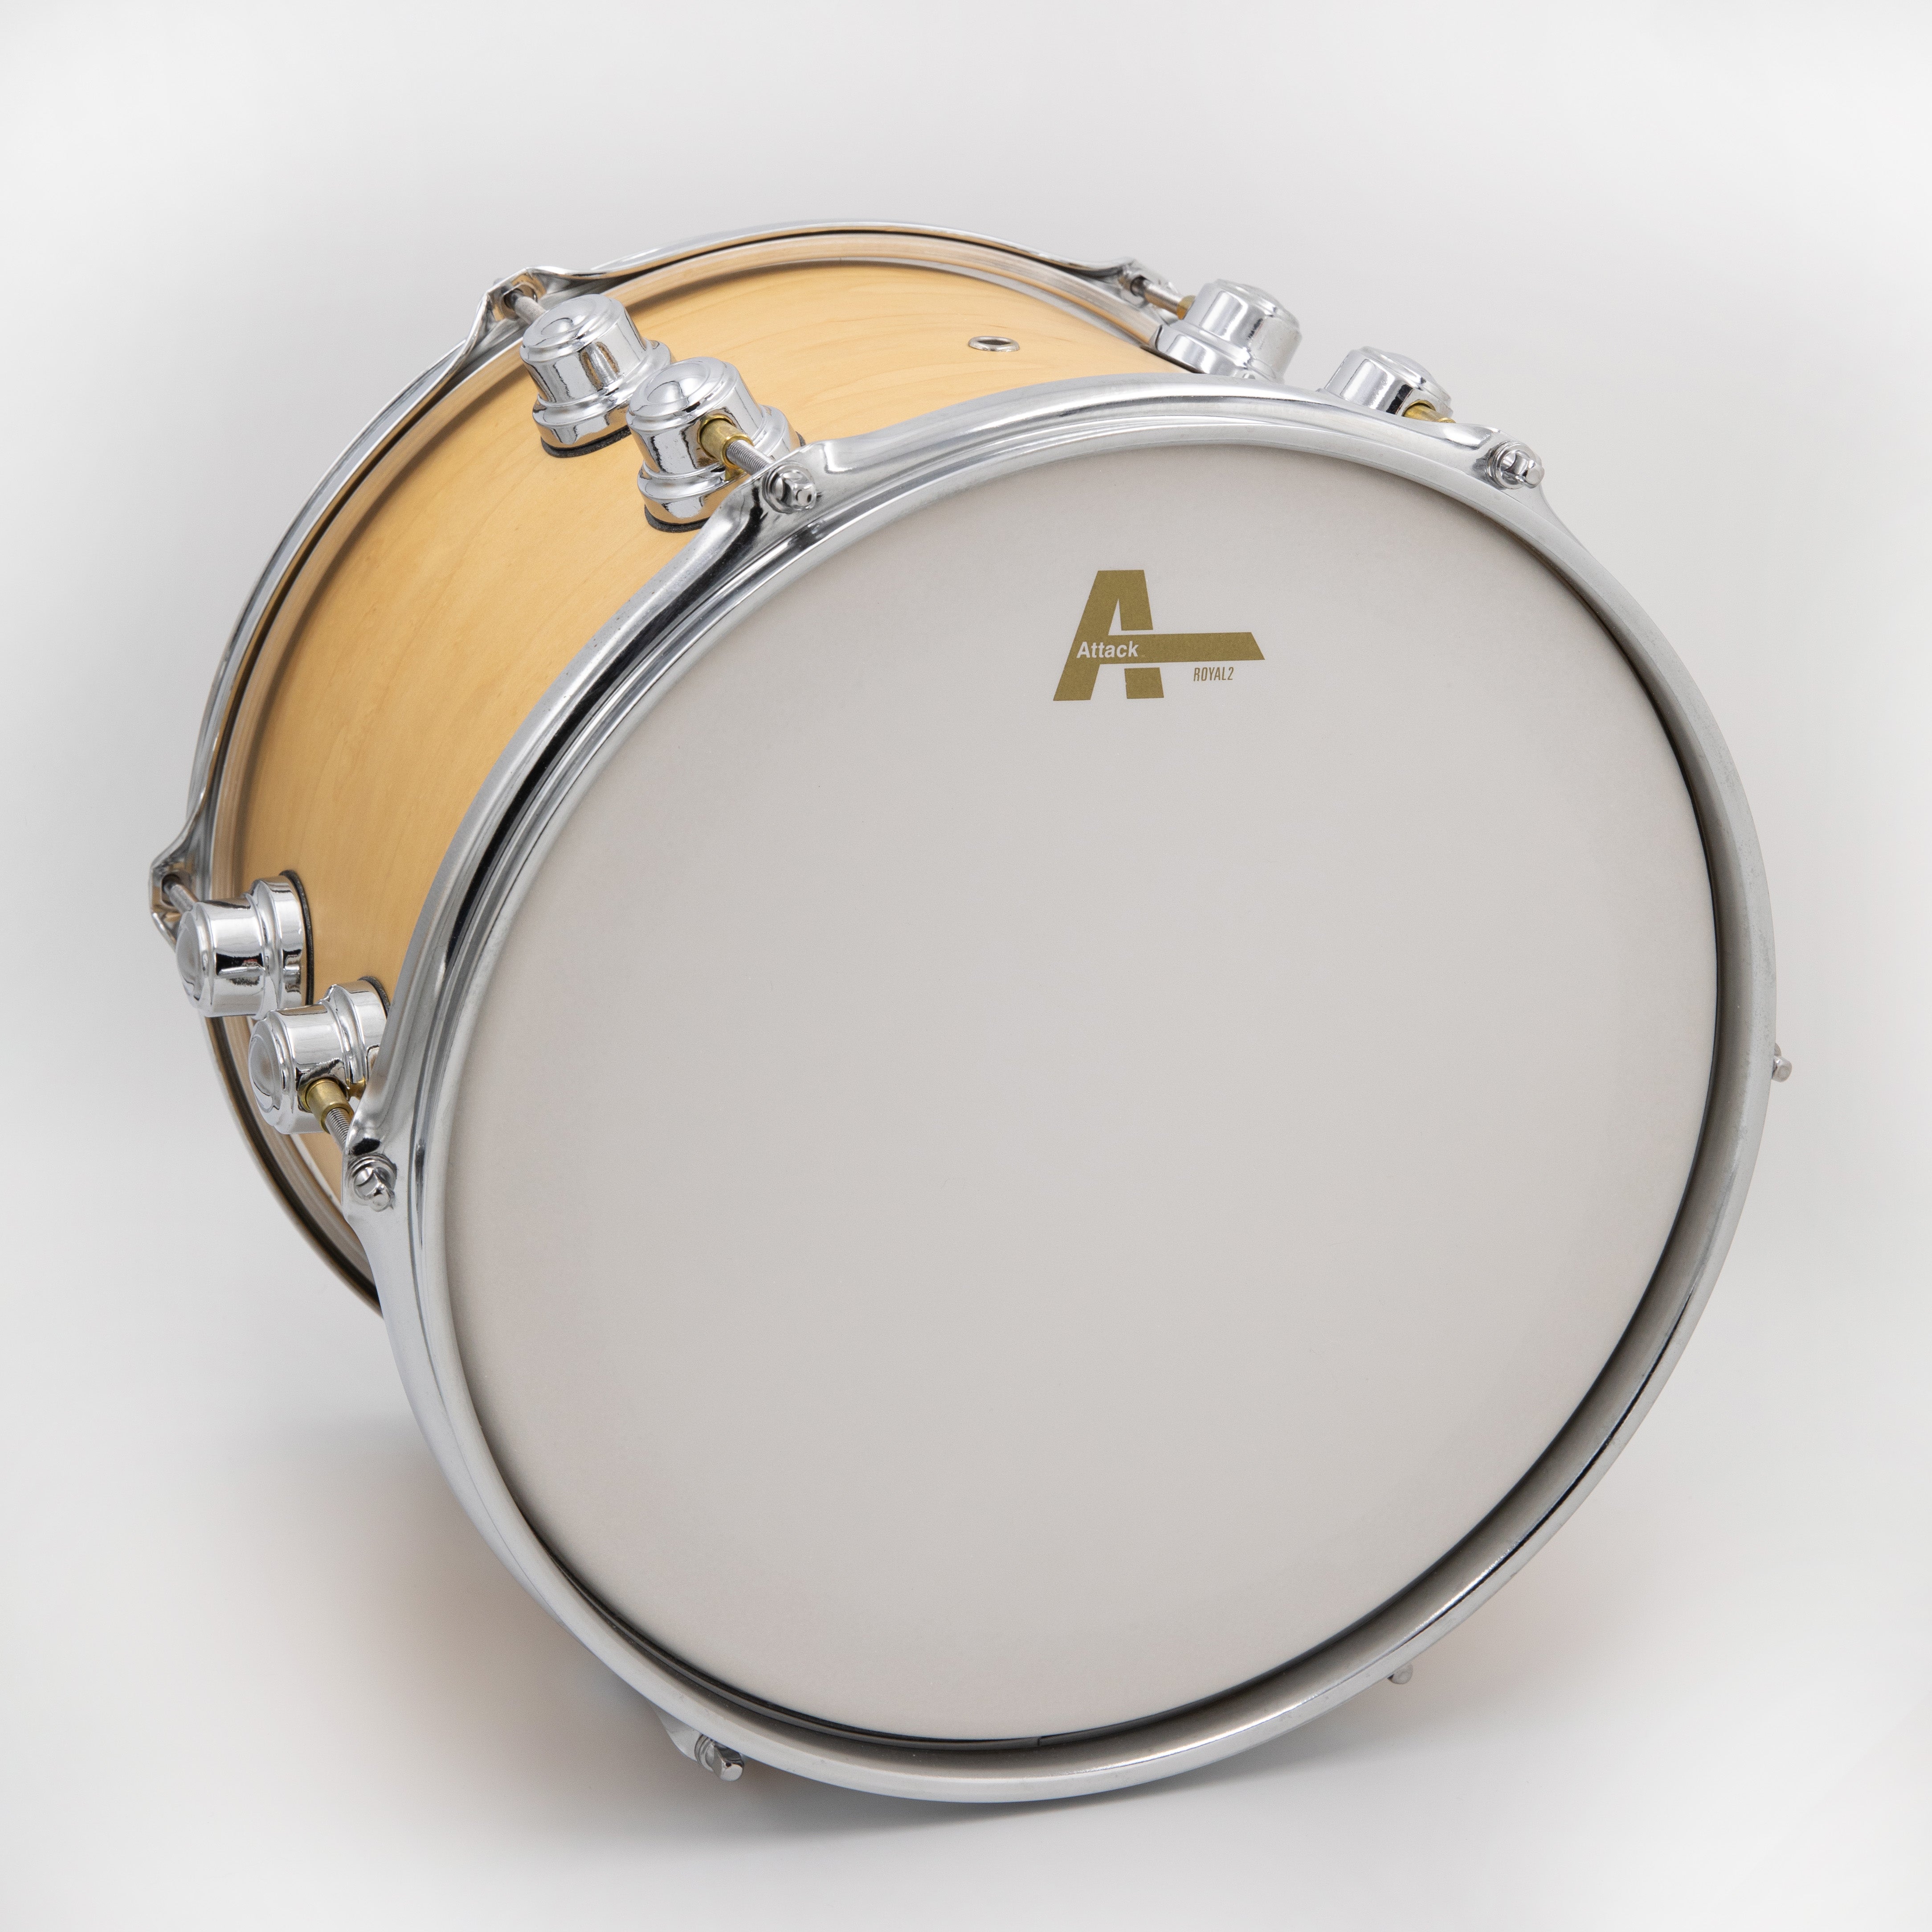 Attack Royal 1 16" 1-Ply Medium S Film Drumhead - Coated